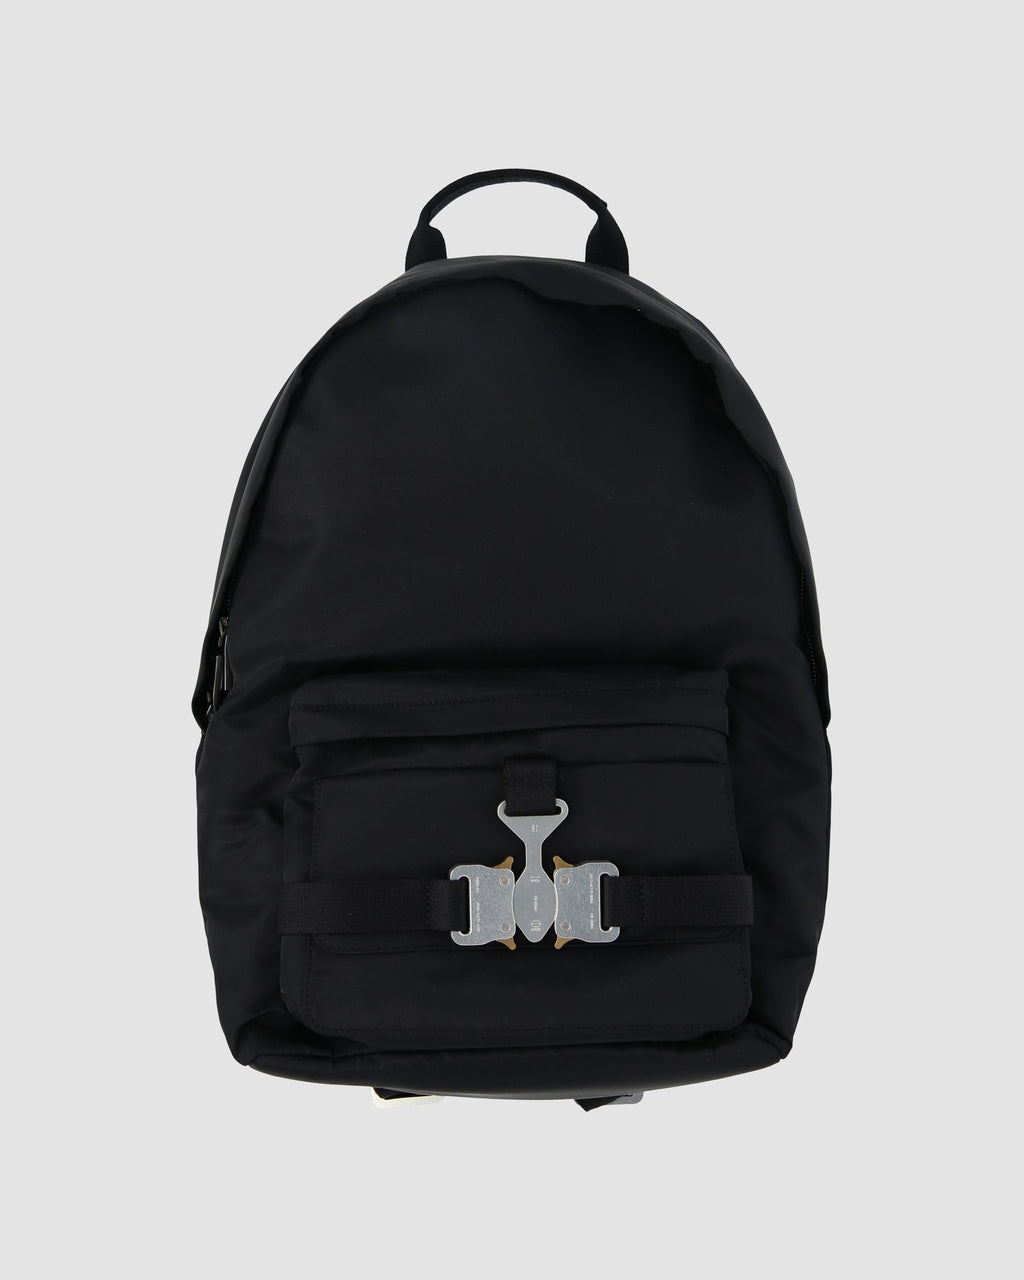 1017 ALYX 9SM TRICON BACKPACK BLACK-